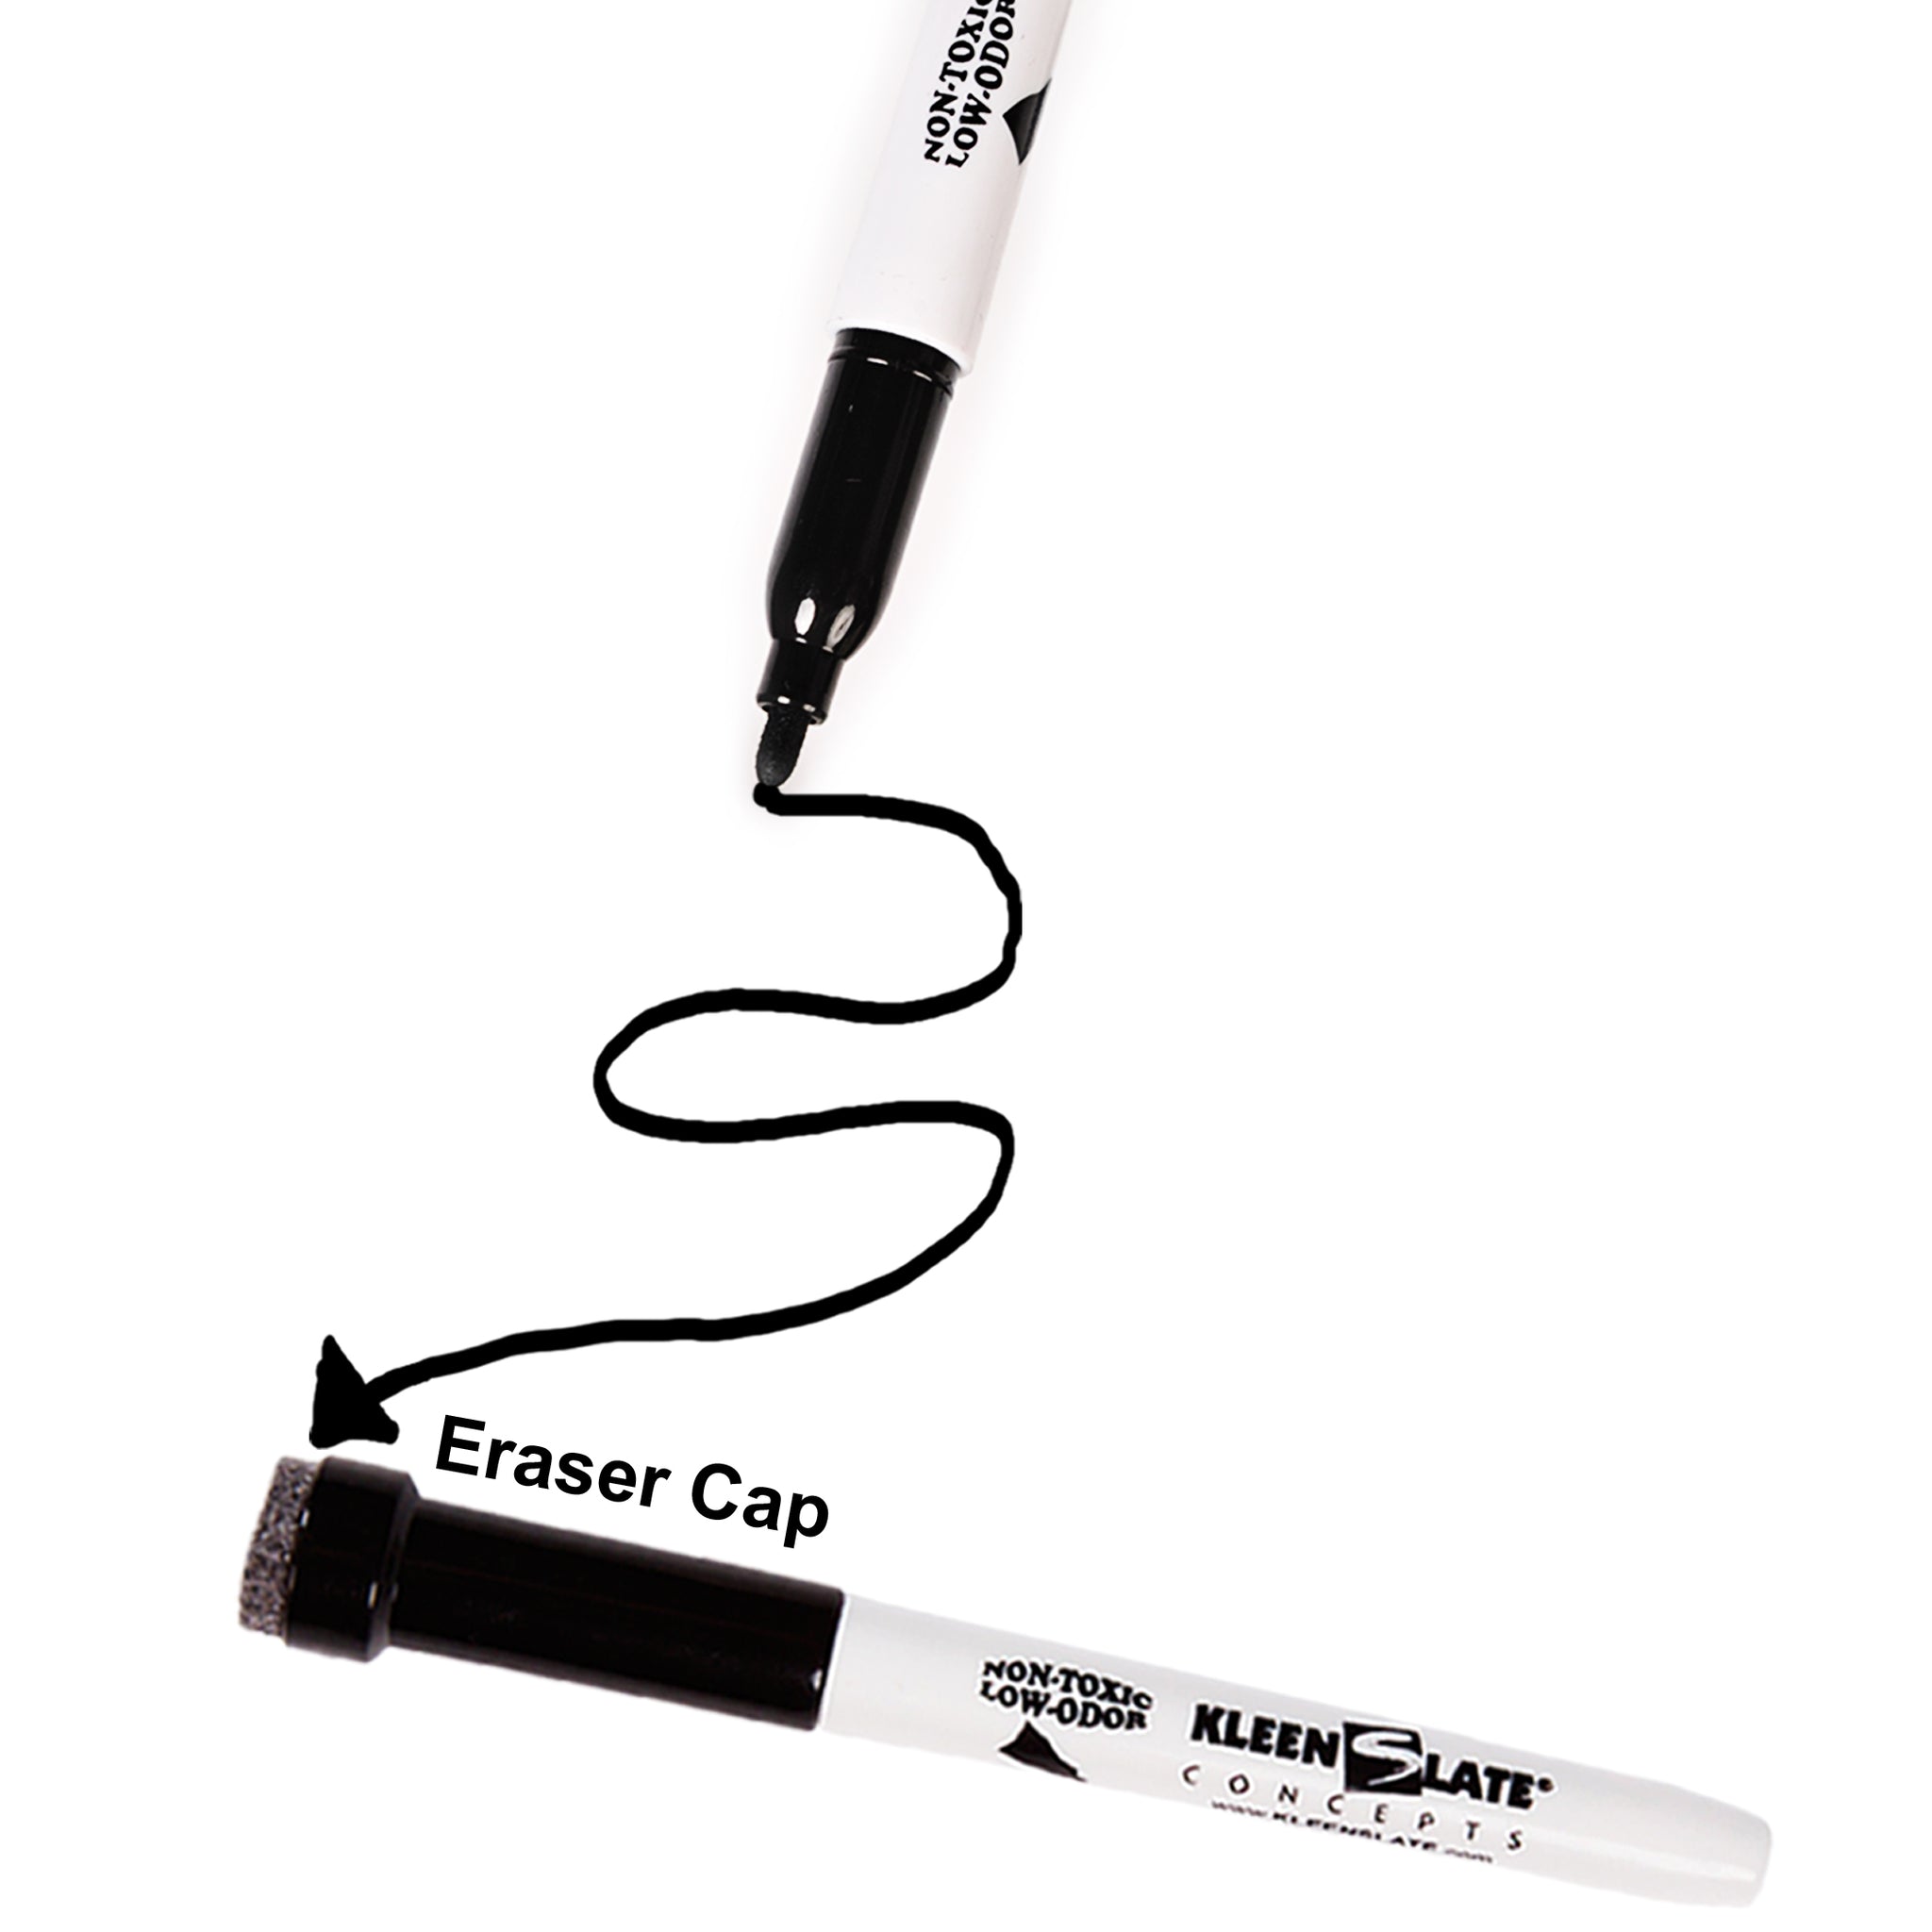 Mini Dry Erase Markers with Erasers, $1.00 - $1.99